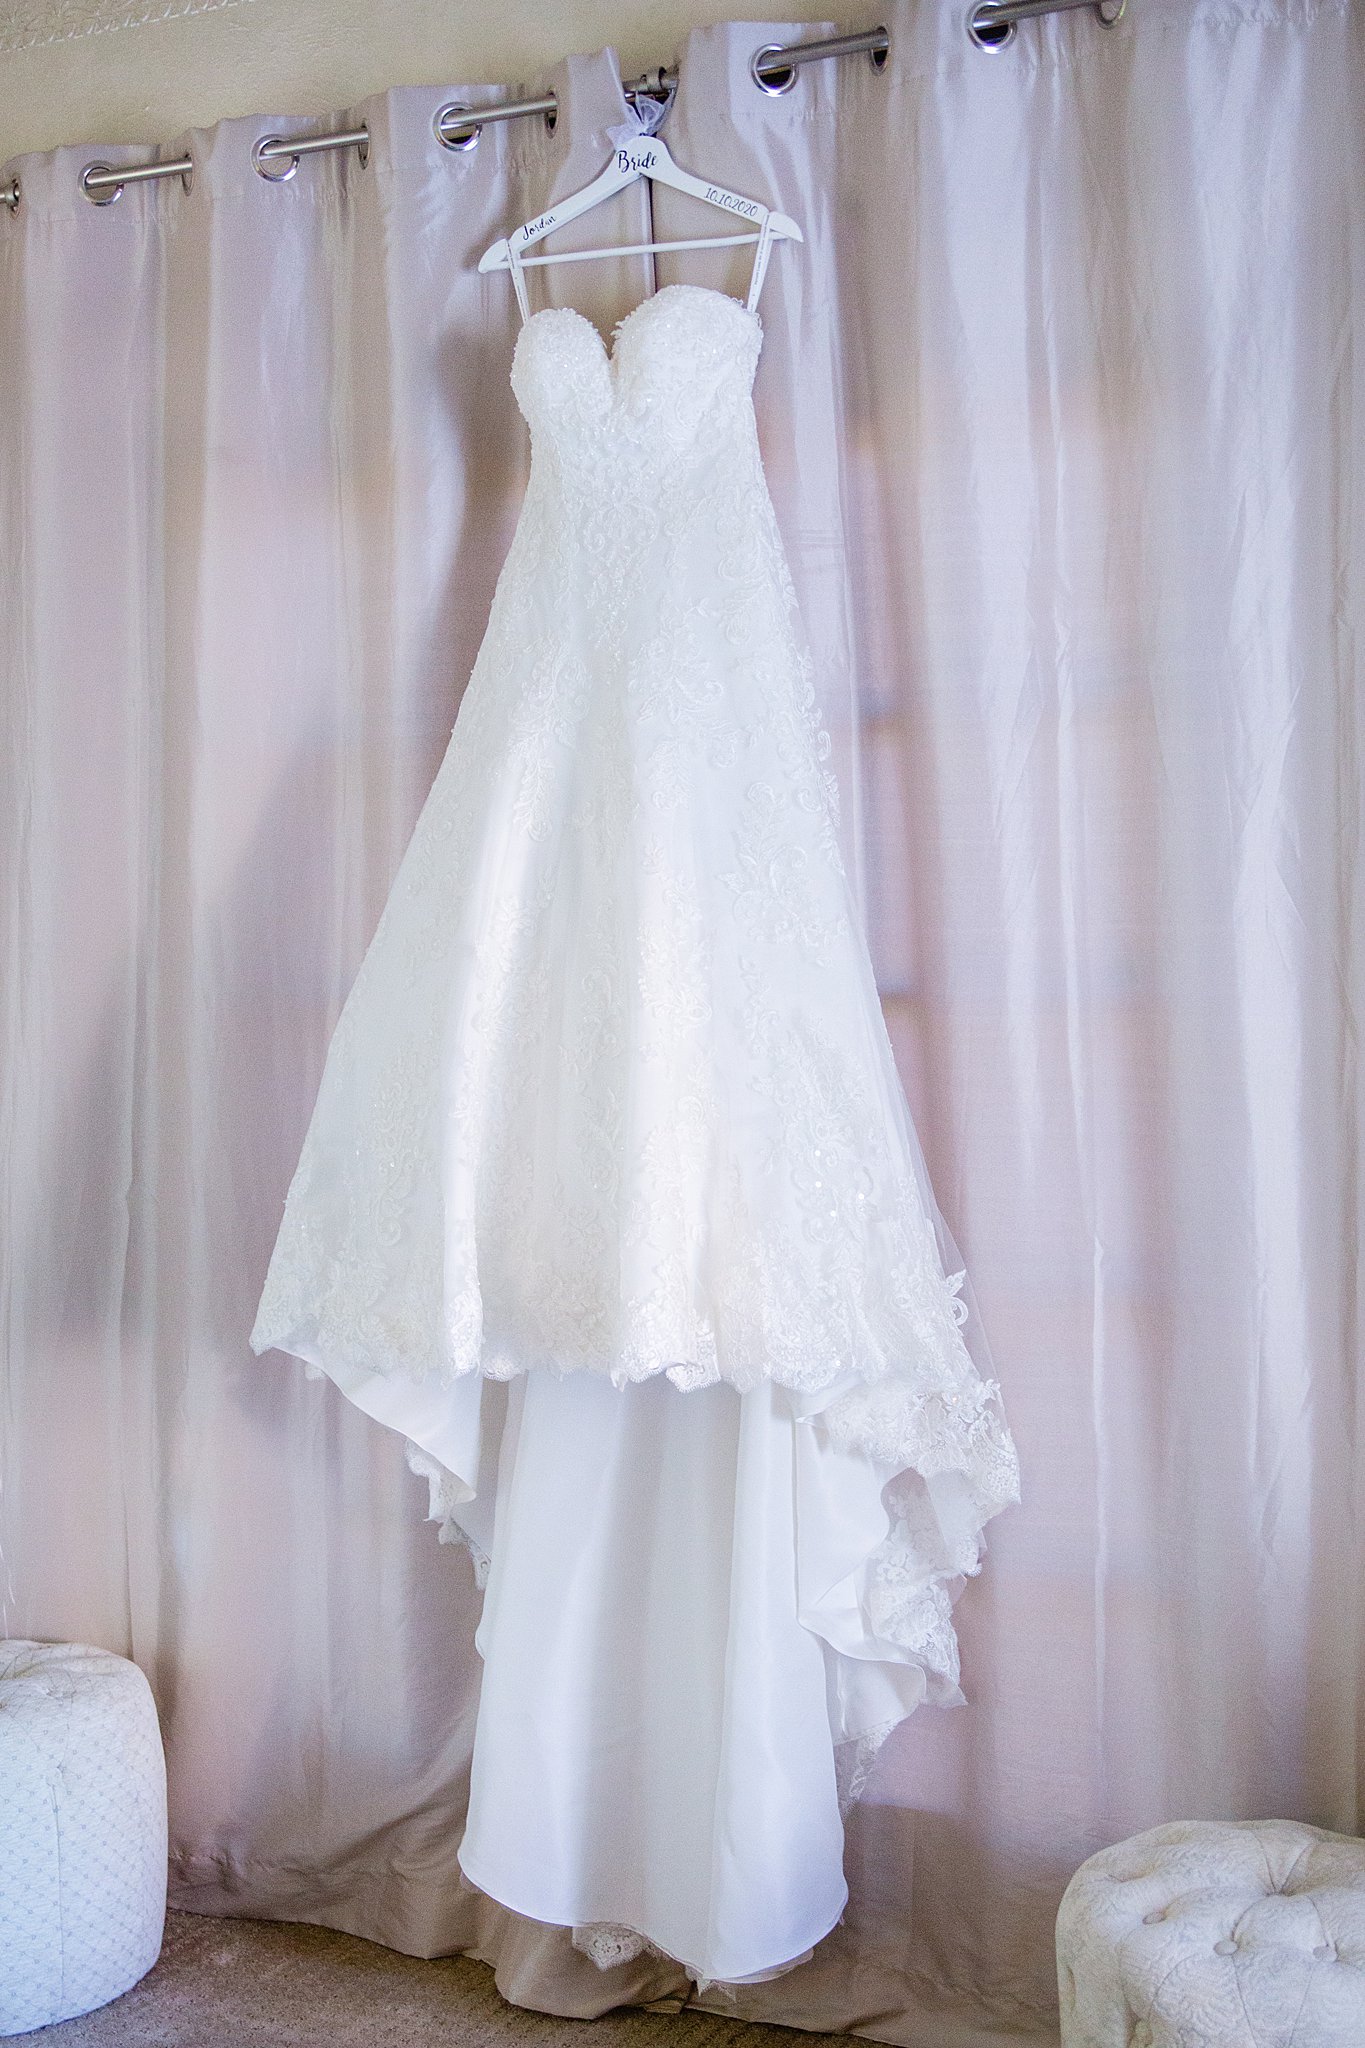 Bride's romantic floral lace wedding dress for her Secret Garden Events wedding by PMA Photography.